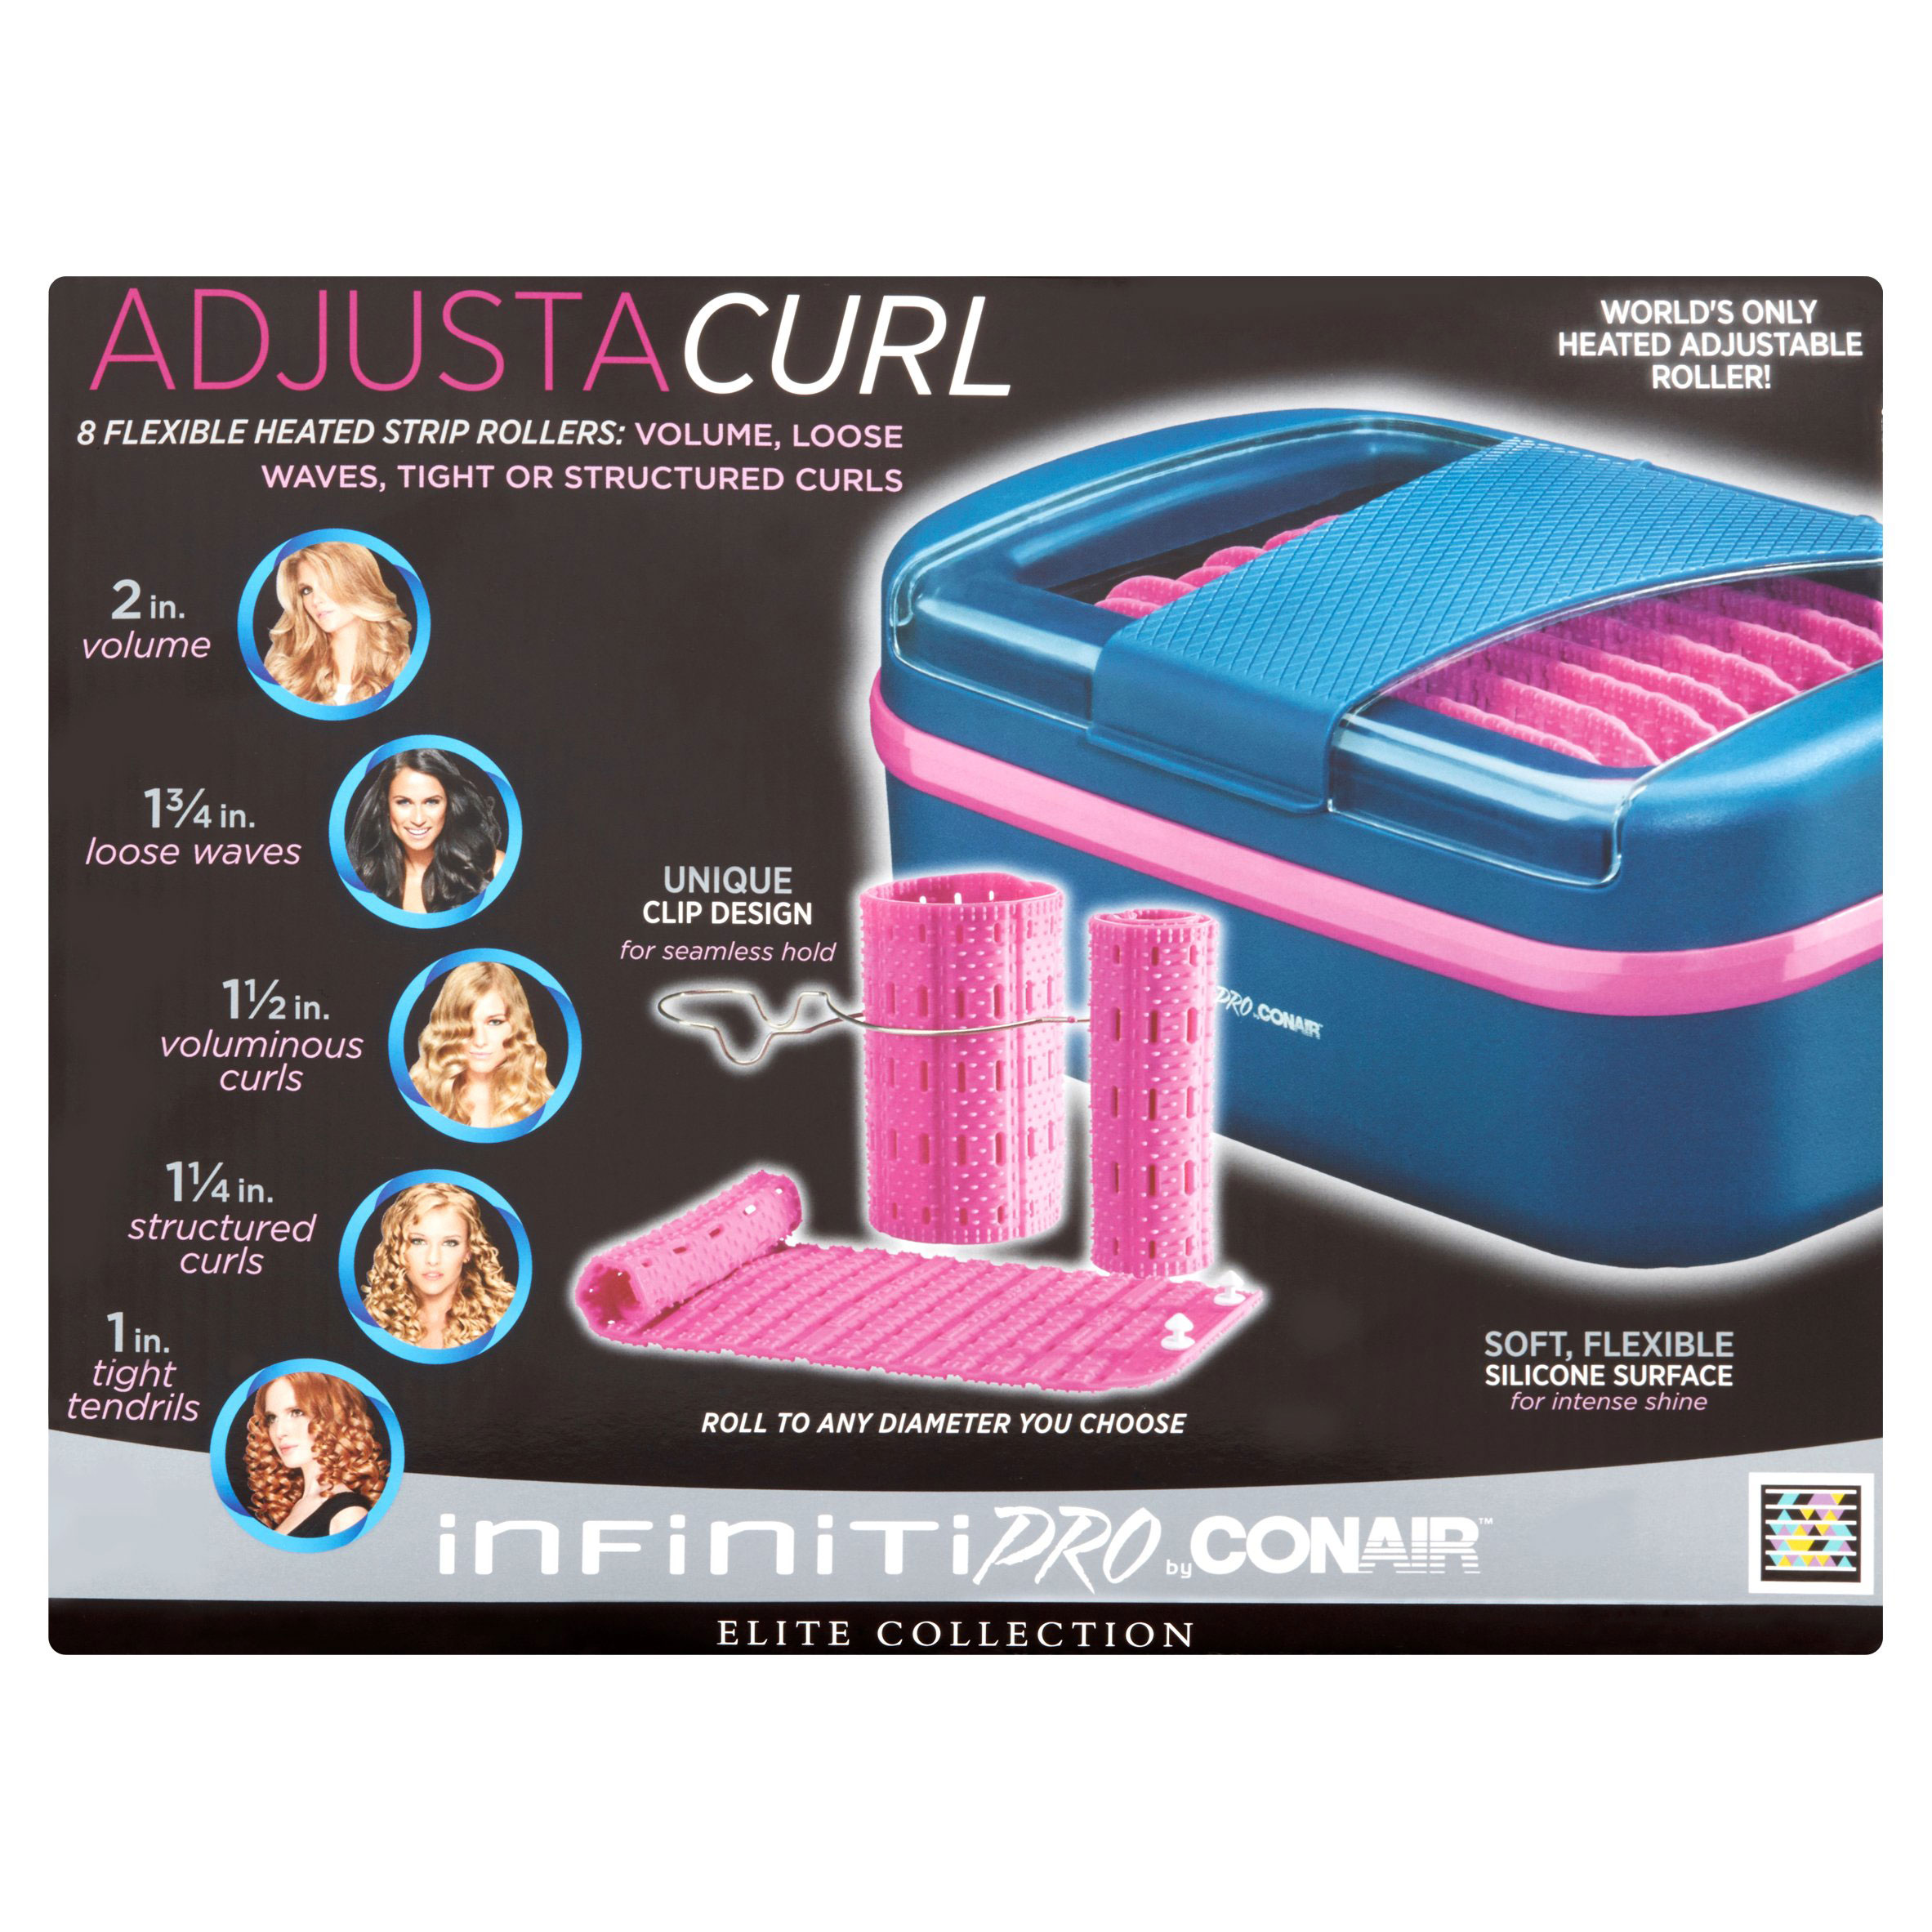 Conair AdjustaCurl InfinitiPRO Soft Flexi Silicone Heated Rollers 1-Pack